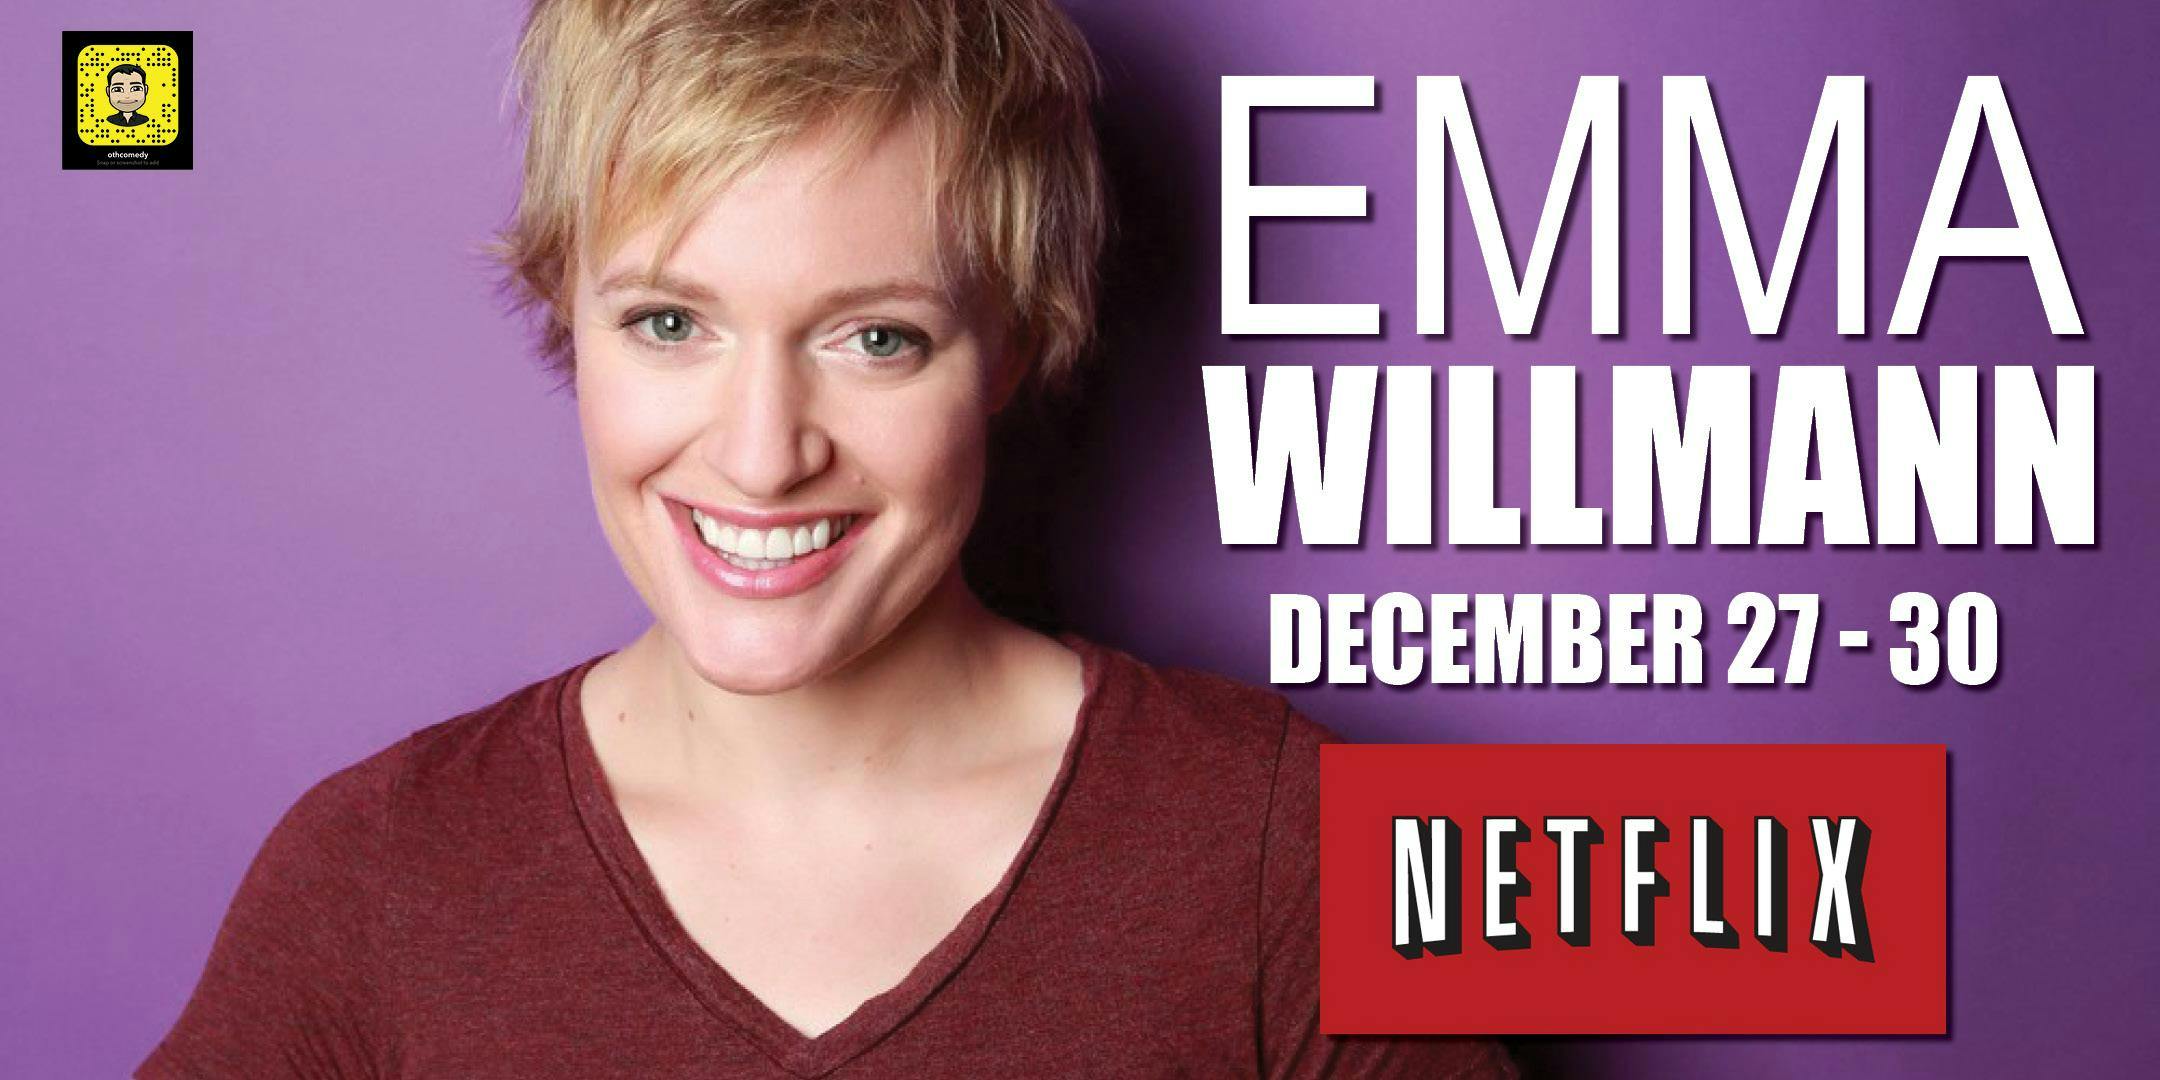 Comedian Emma Willmann From Netflix Live in Naples, Florida